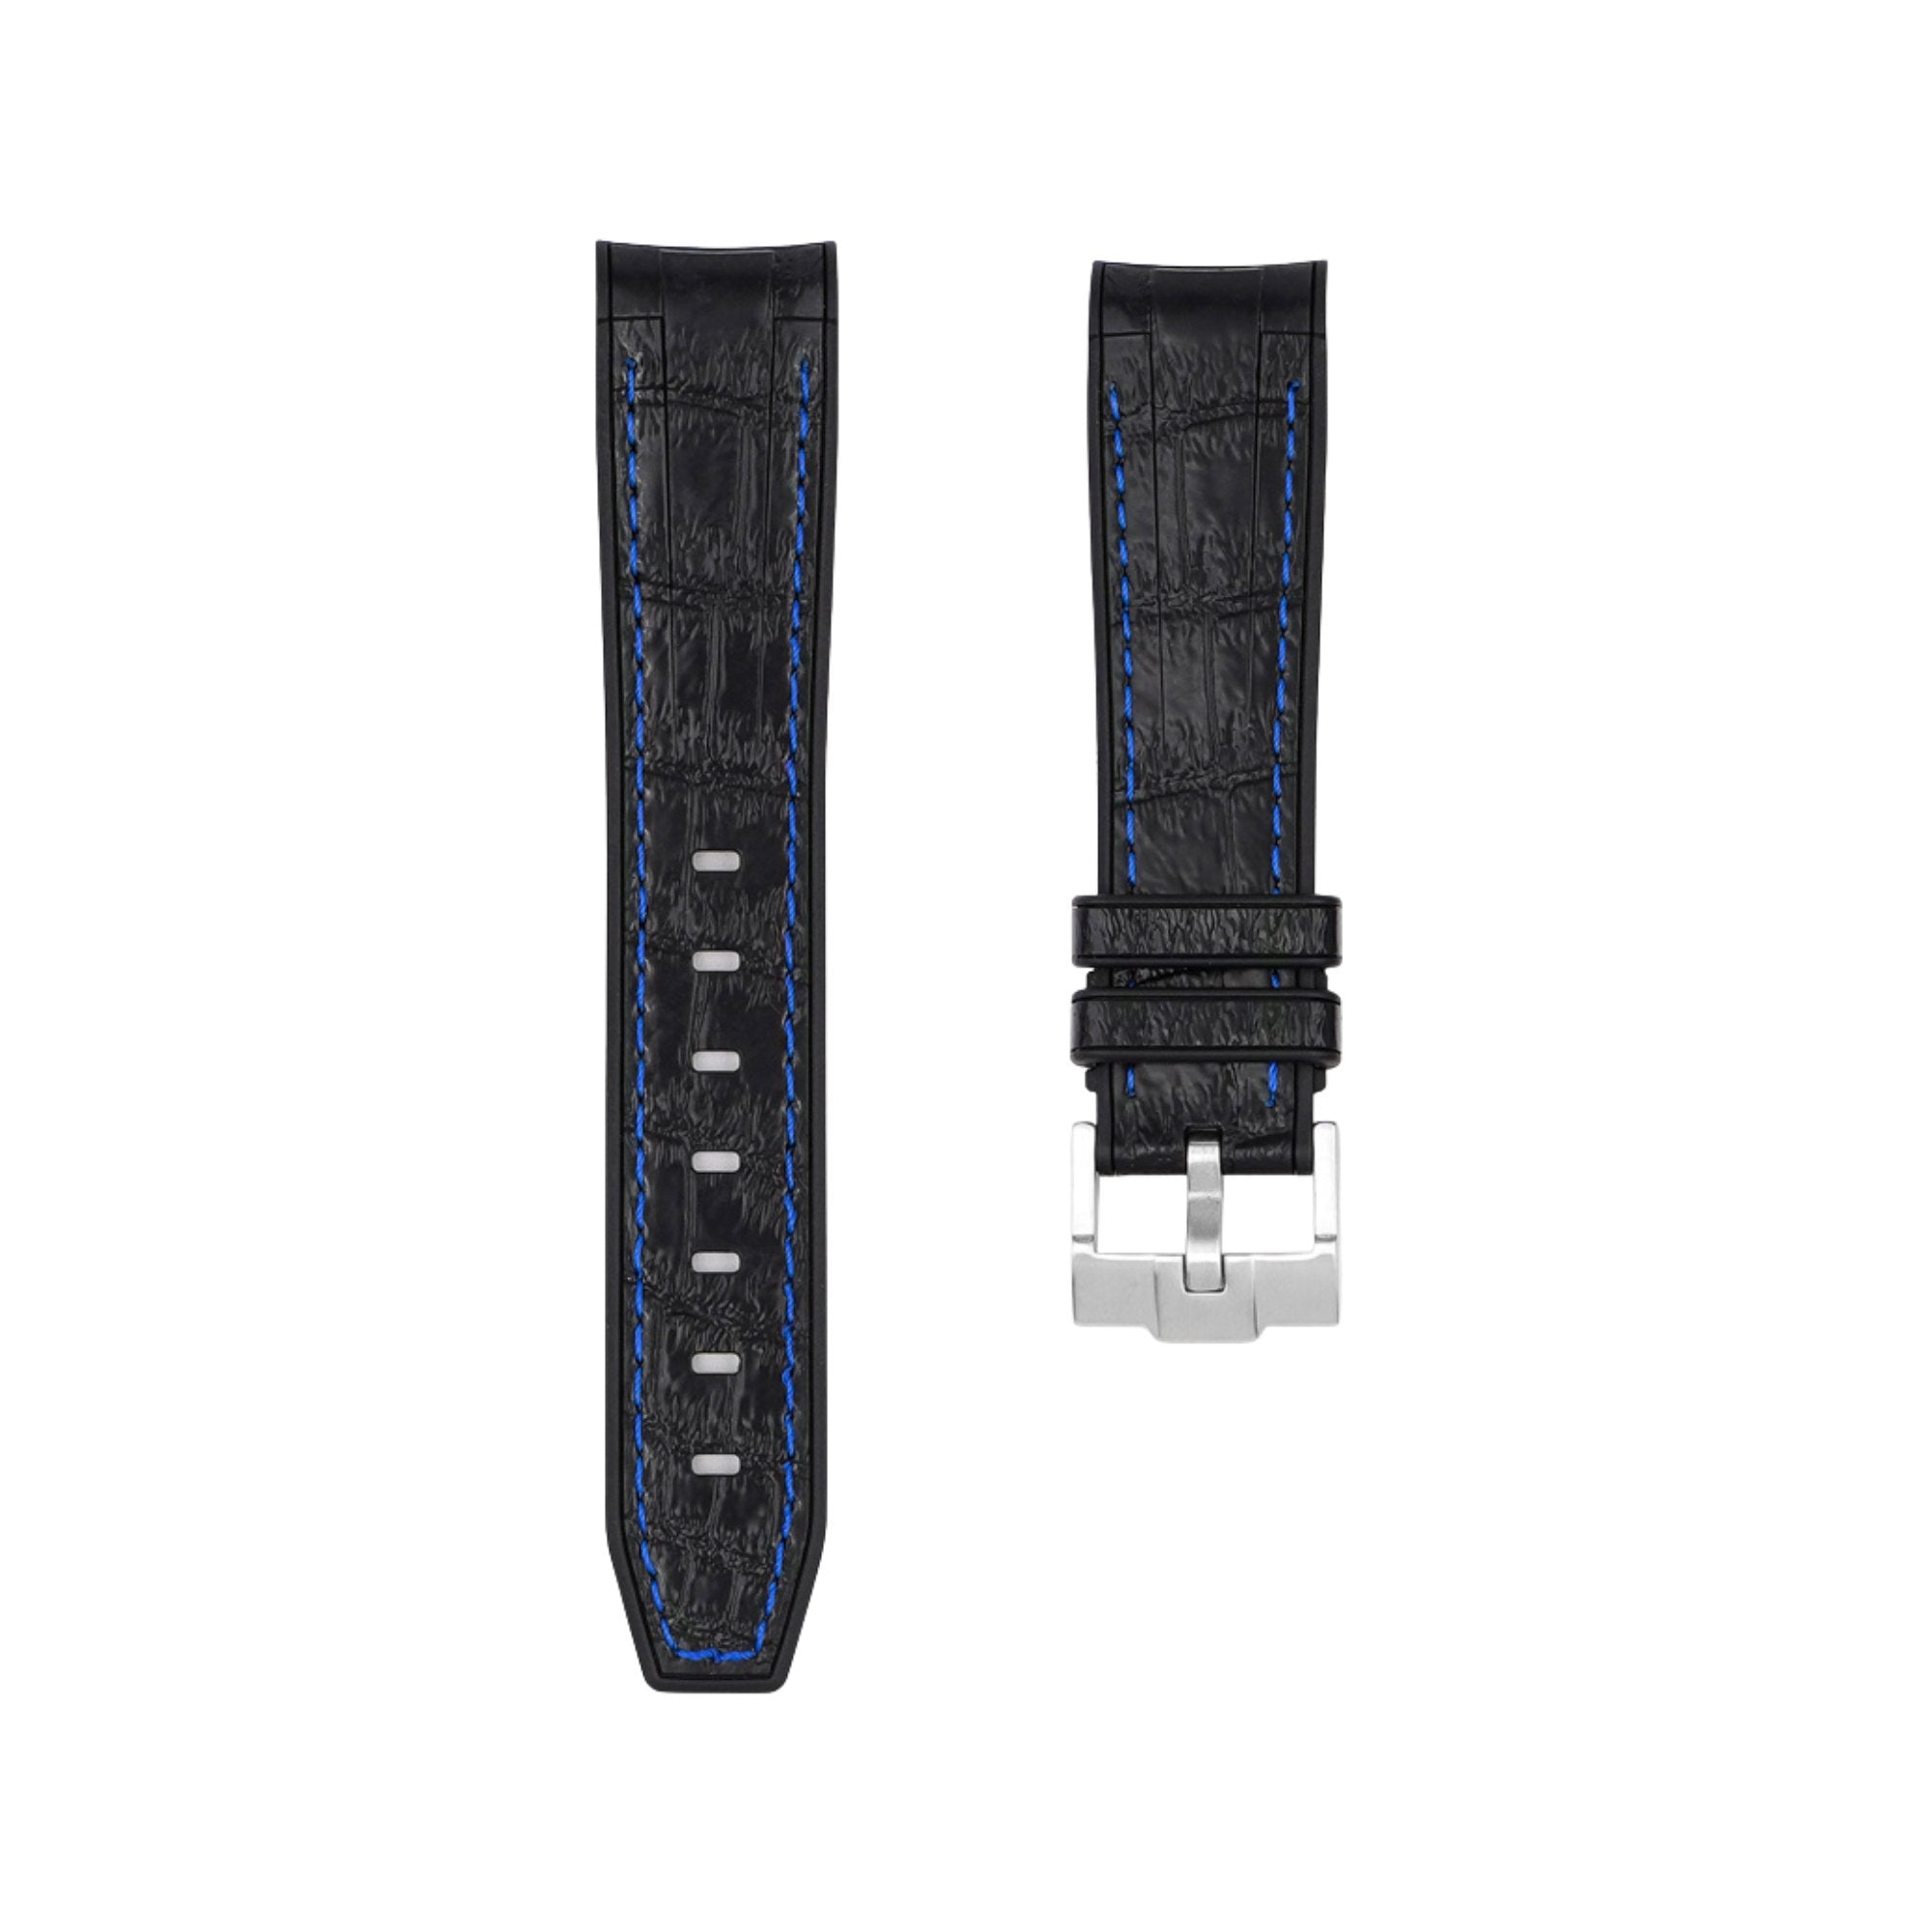 Alligator Embossed Curved End Premium Silicone Strap - Compatible with Omega Moonwatch - Black with Blue Stitch (2406) -StrapSeeker